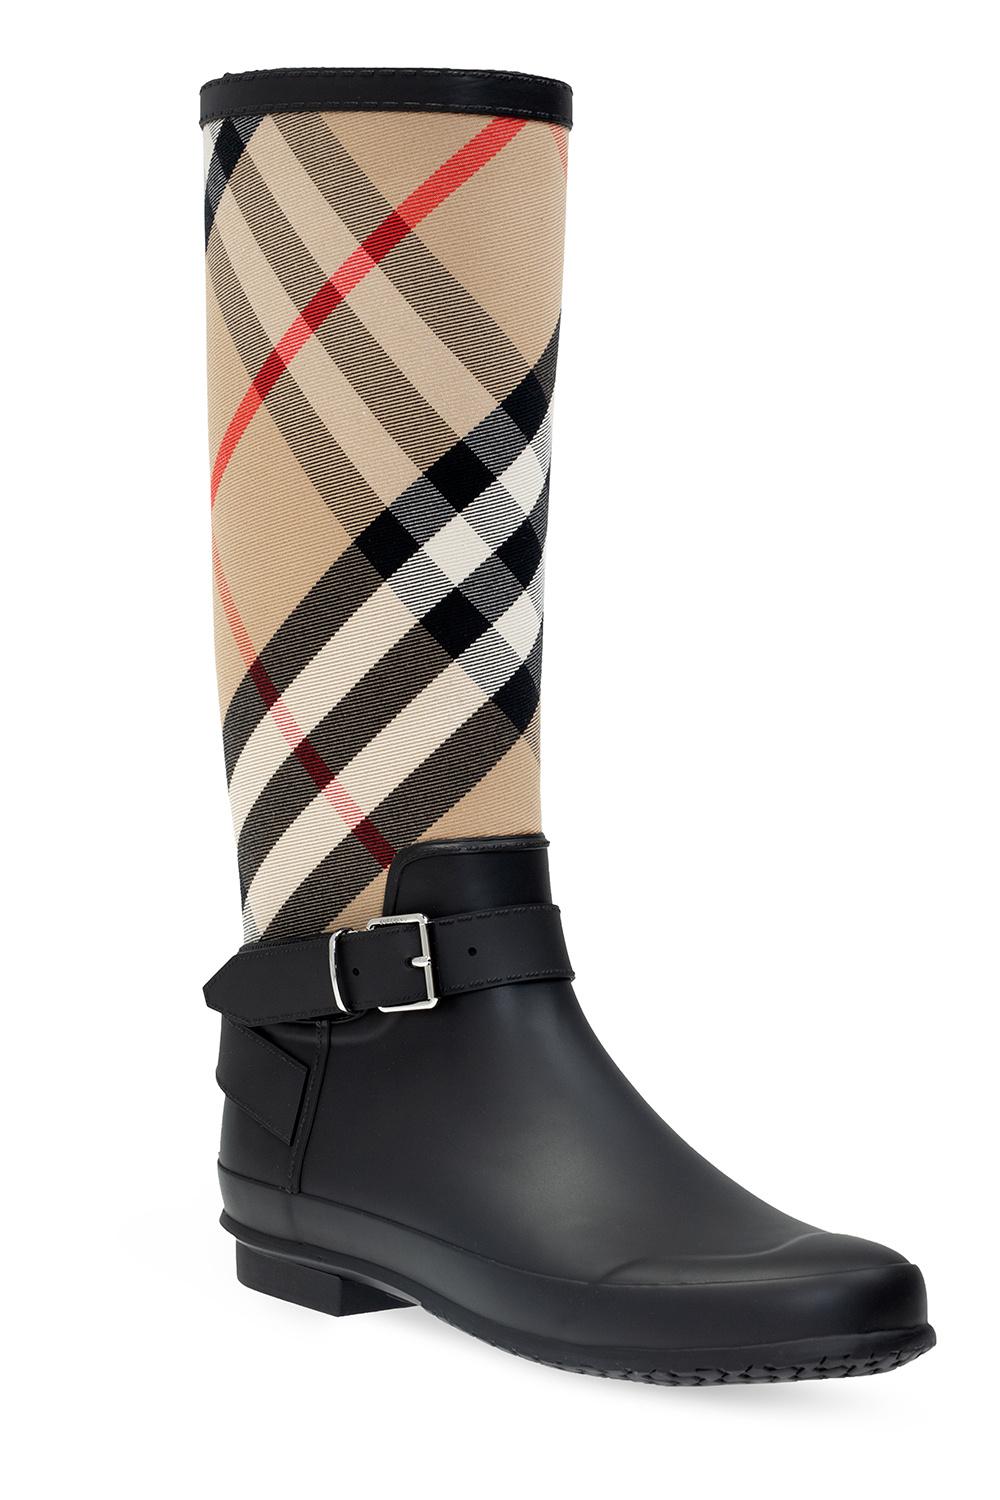 Burberry 'house Check' Rain Boots in Beige (Natural) | Lyst